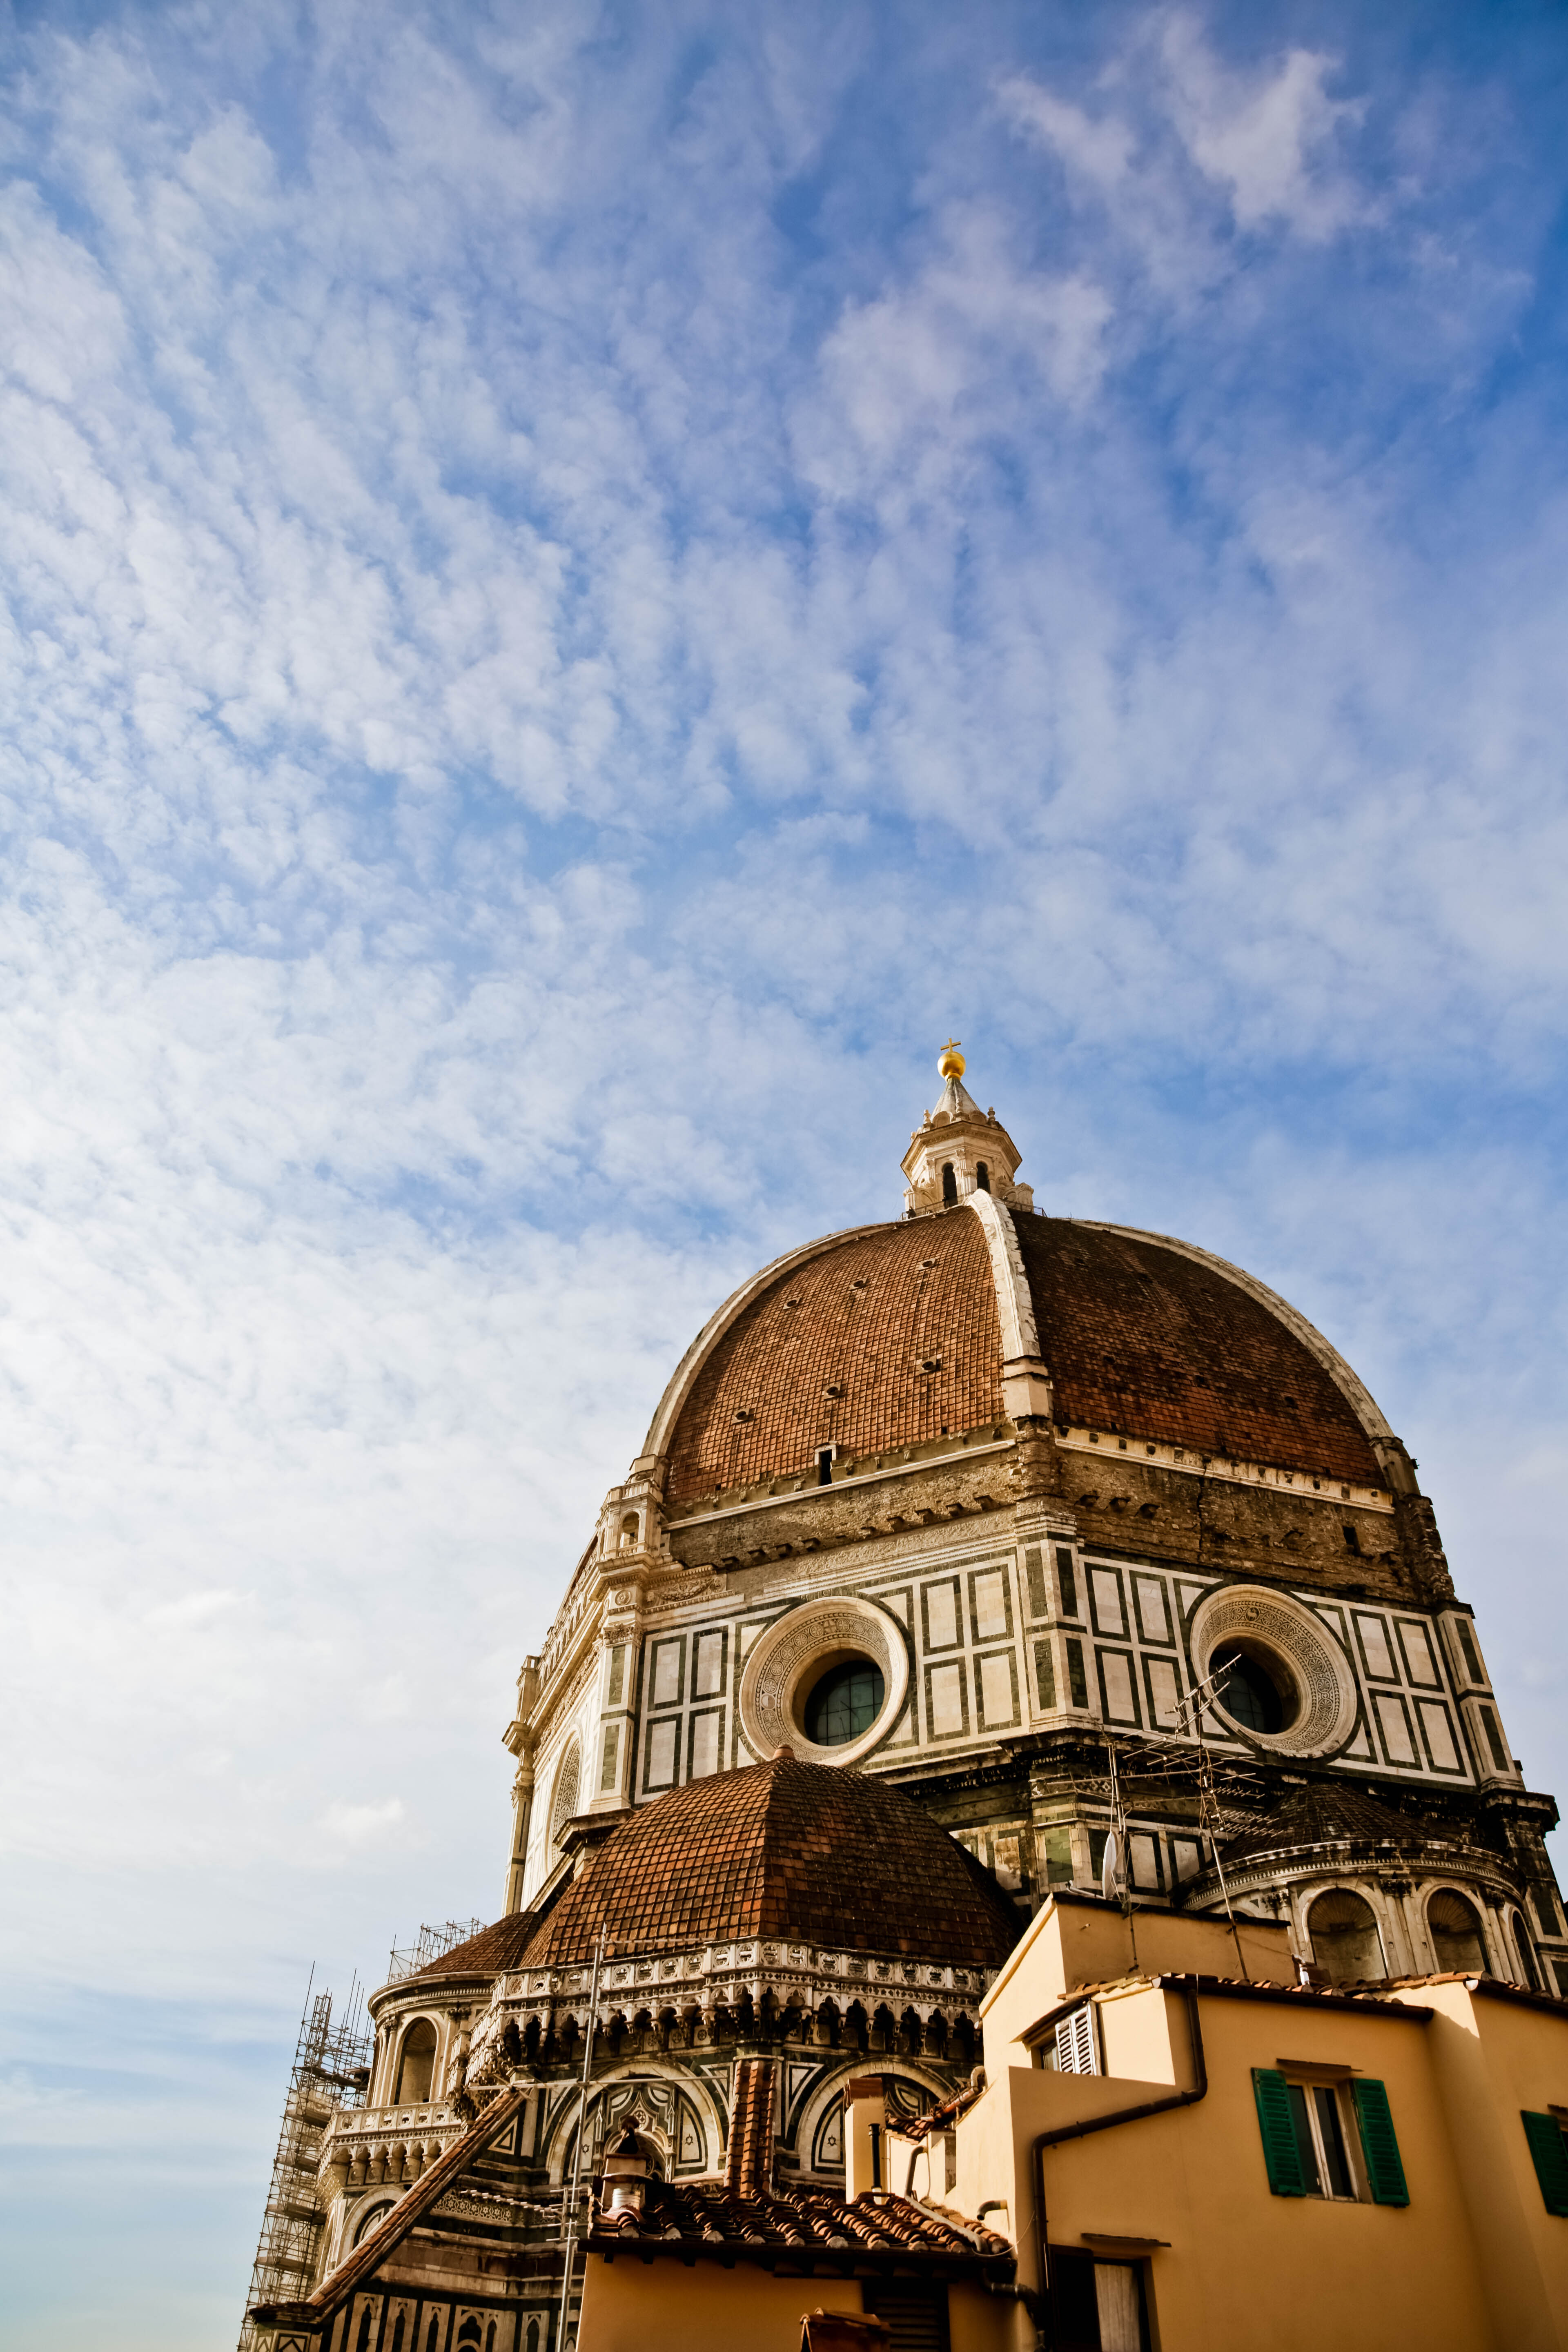 Things to do in Florence, Italy: Climb the Duomo